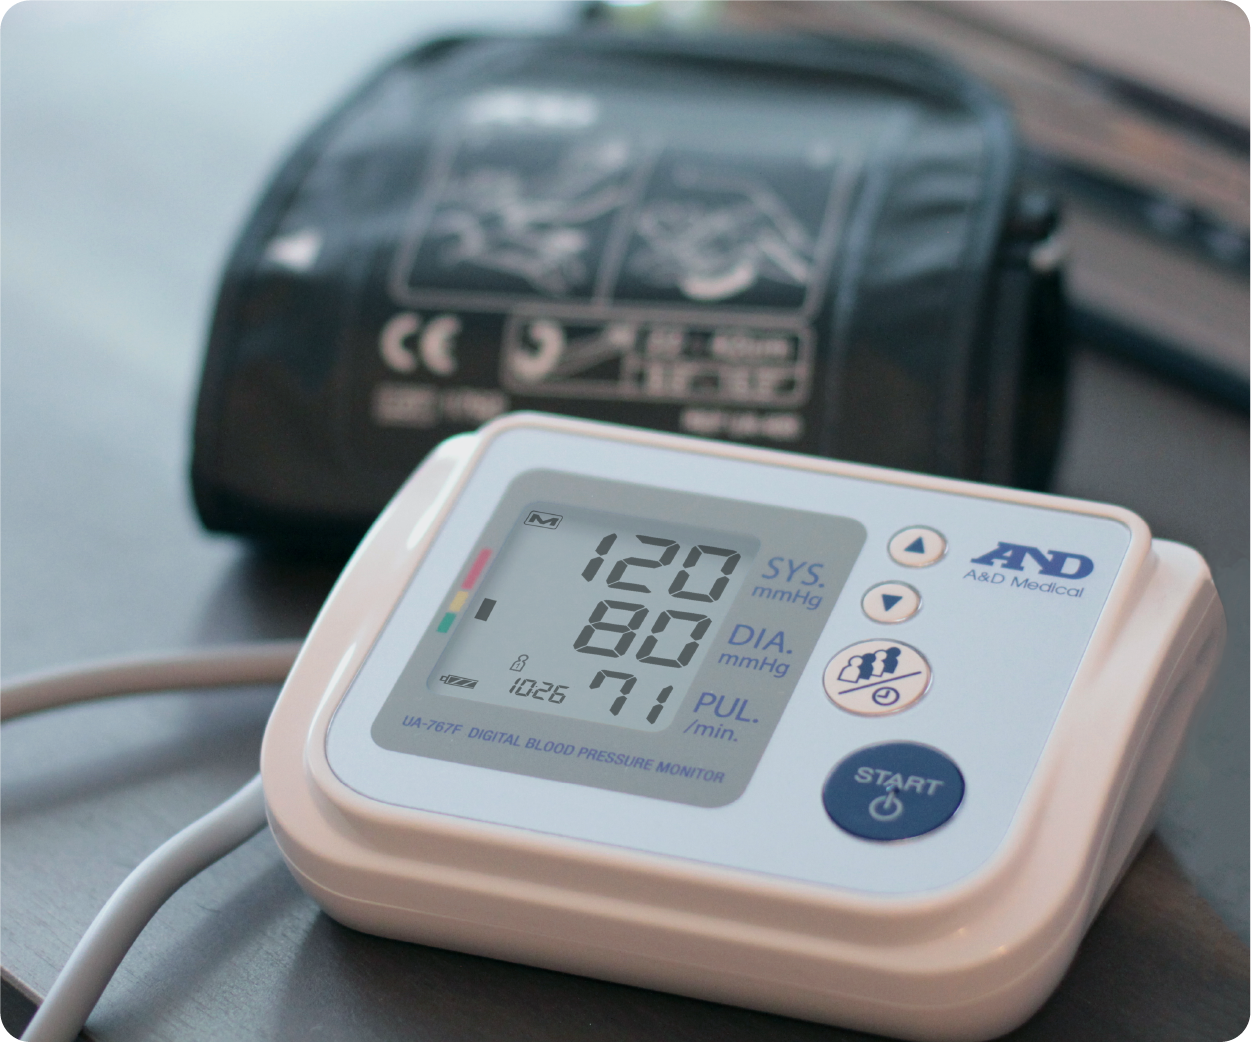 omron blood pressure monitor 10 for Medical Uses 